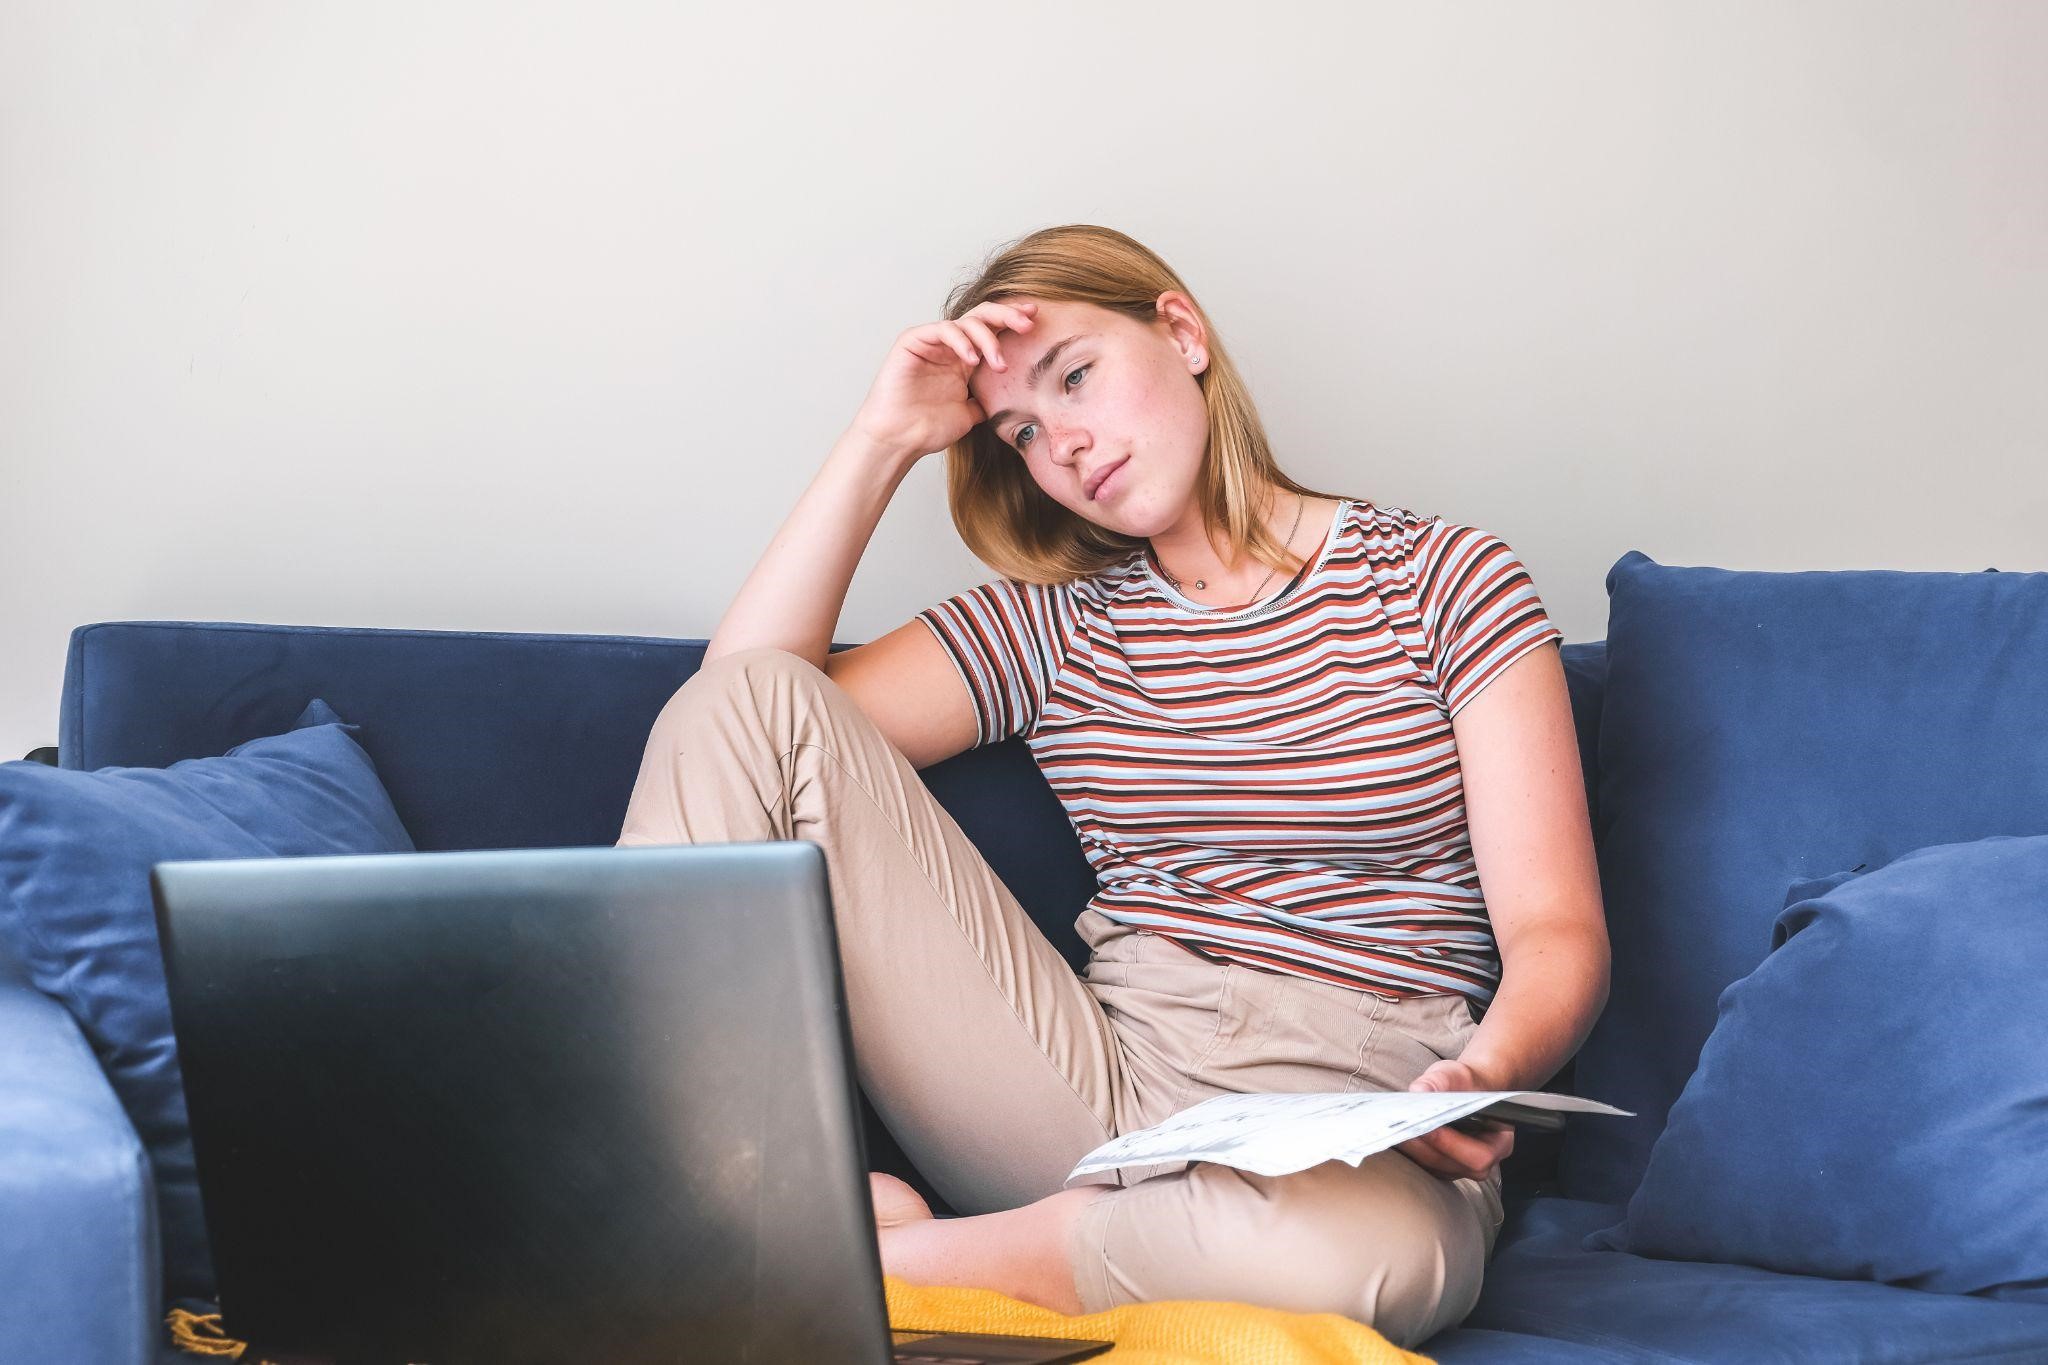 A girl, looking tired, works on her computer while holding newspapers and sitting on the couch